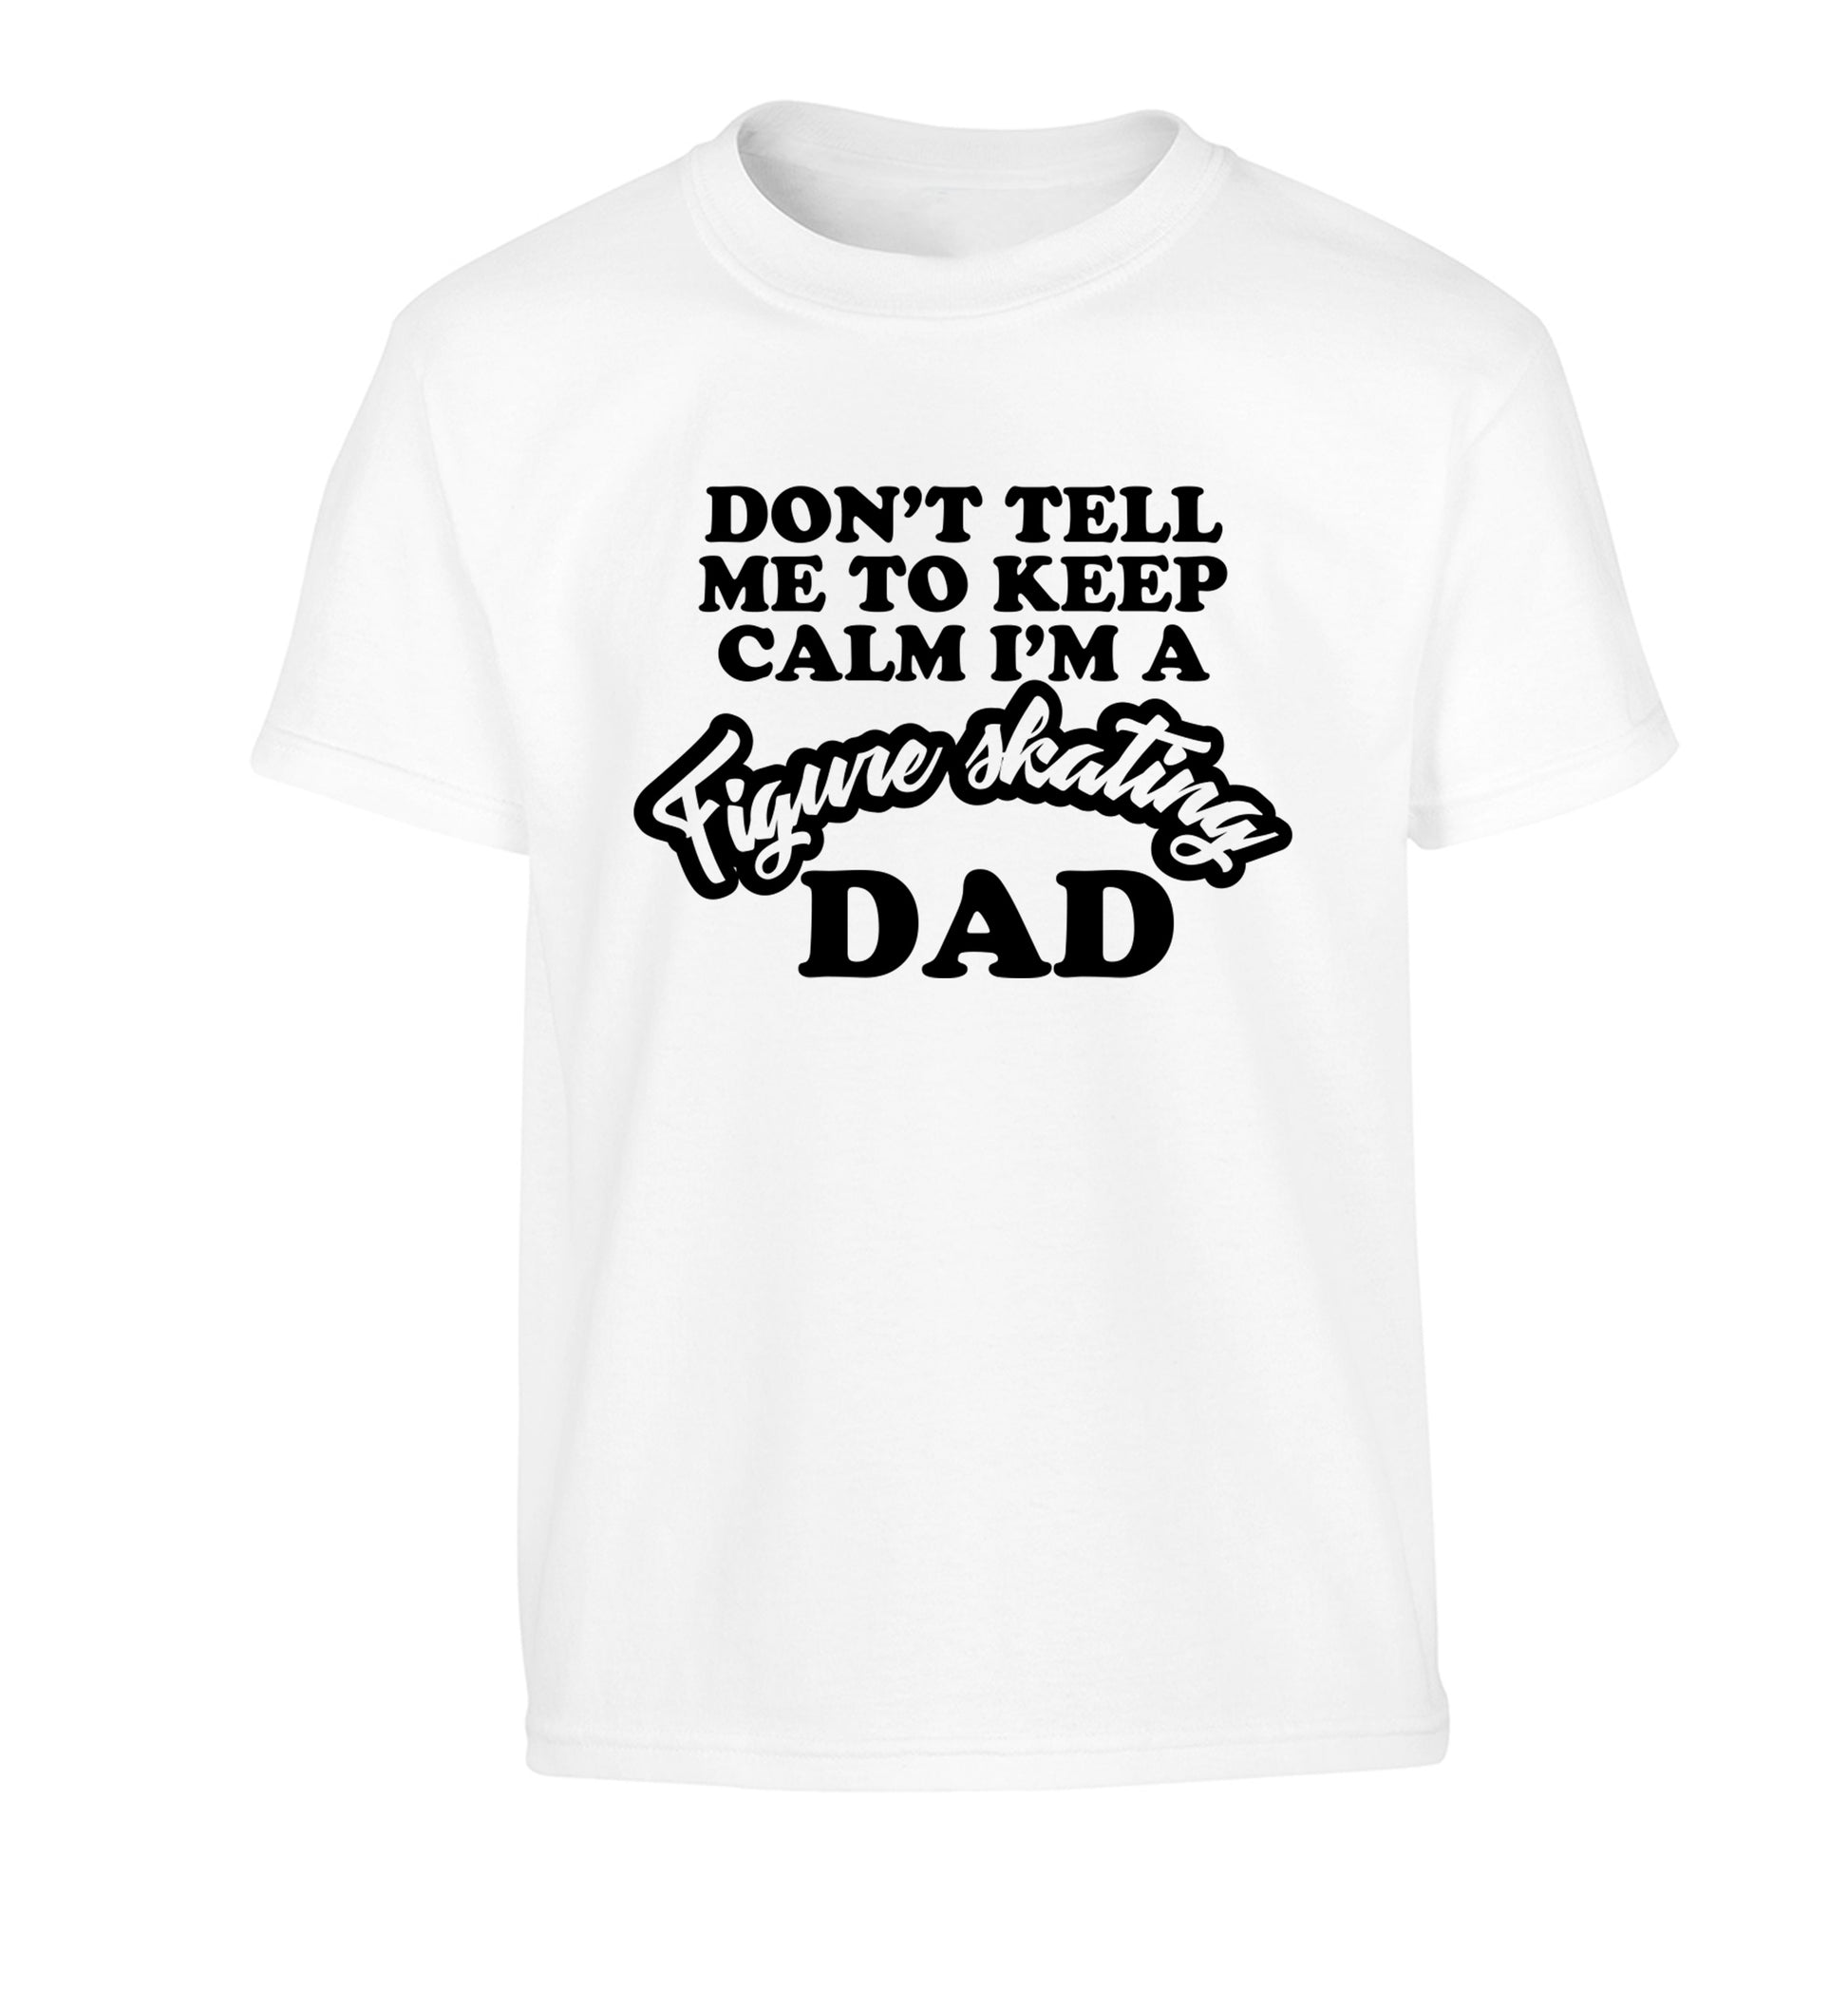 Don't tell me to keep calm I'm a figure skating dad Children's white Tshirt 12-14 Years